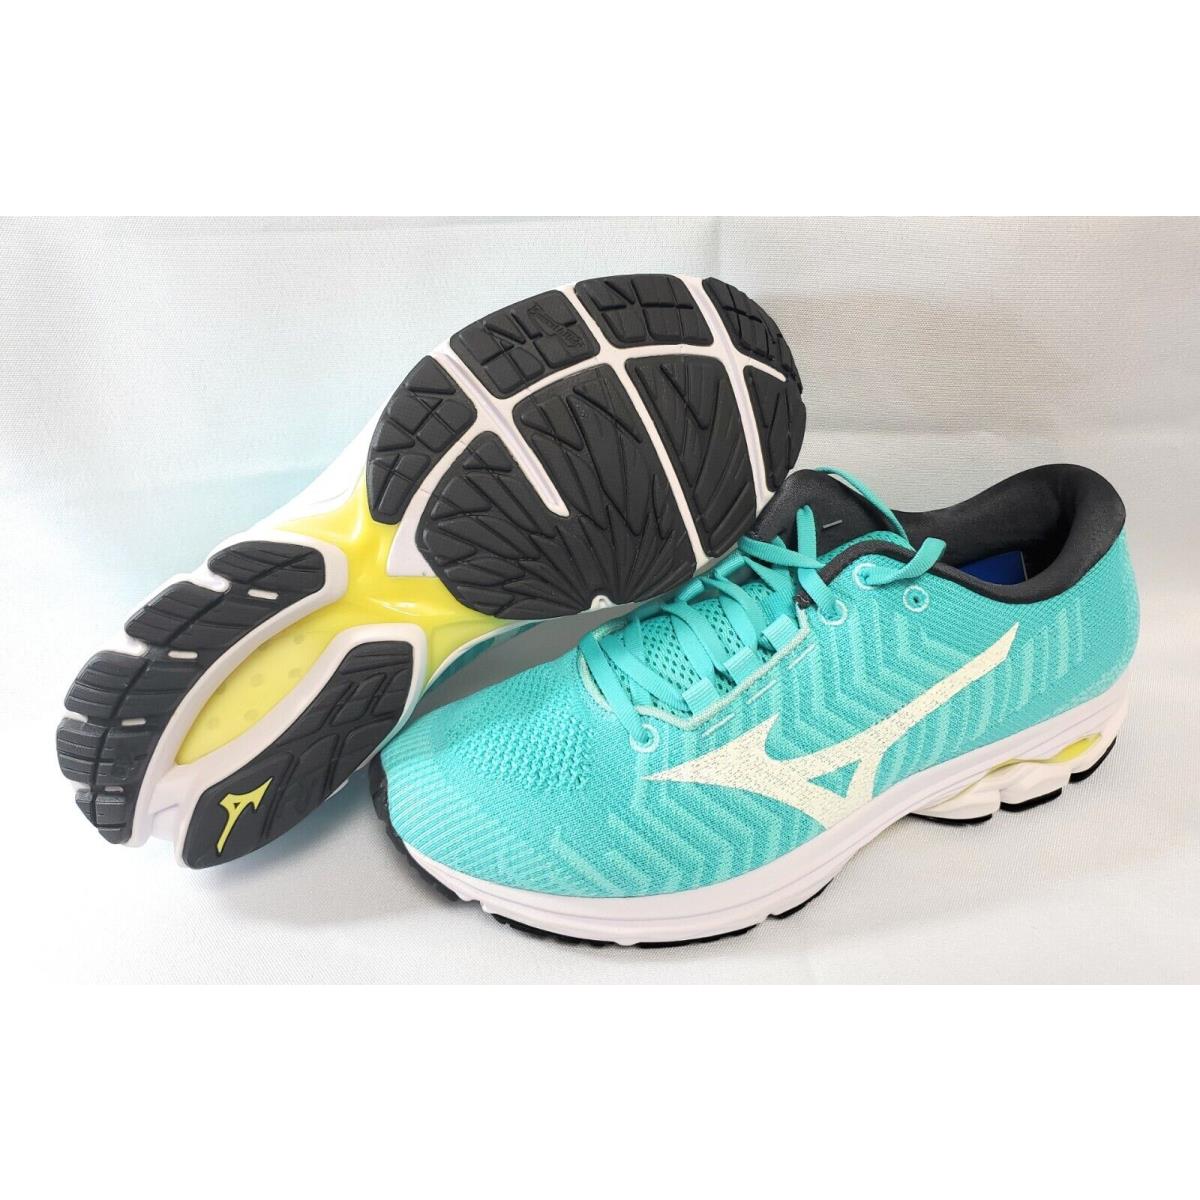 Womens Mizuno Wave Rider Waveknit 3 Turquoise Athletic Running Sneakers Shoes